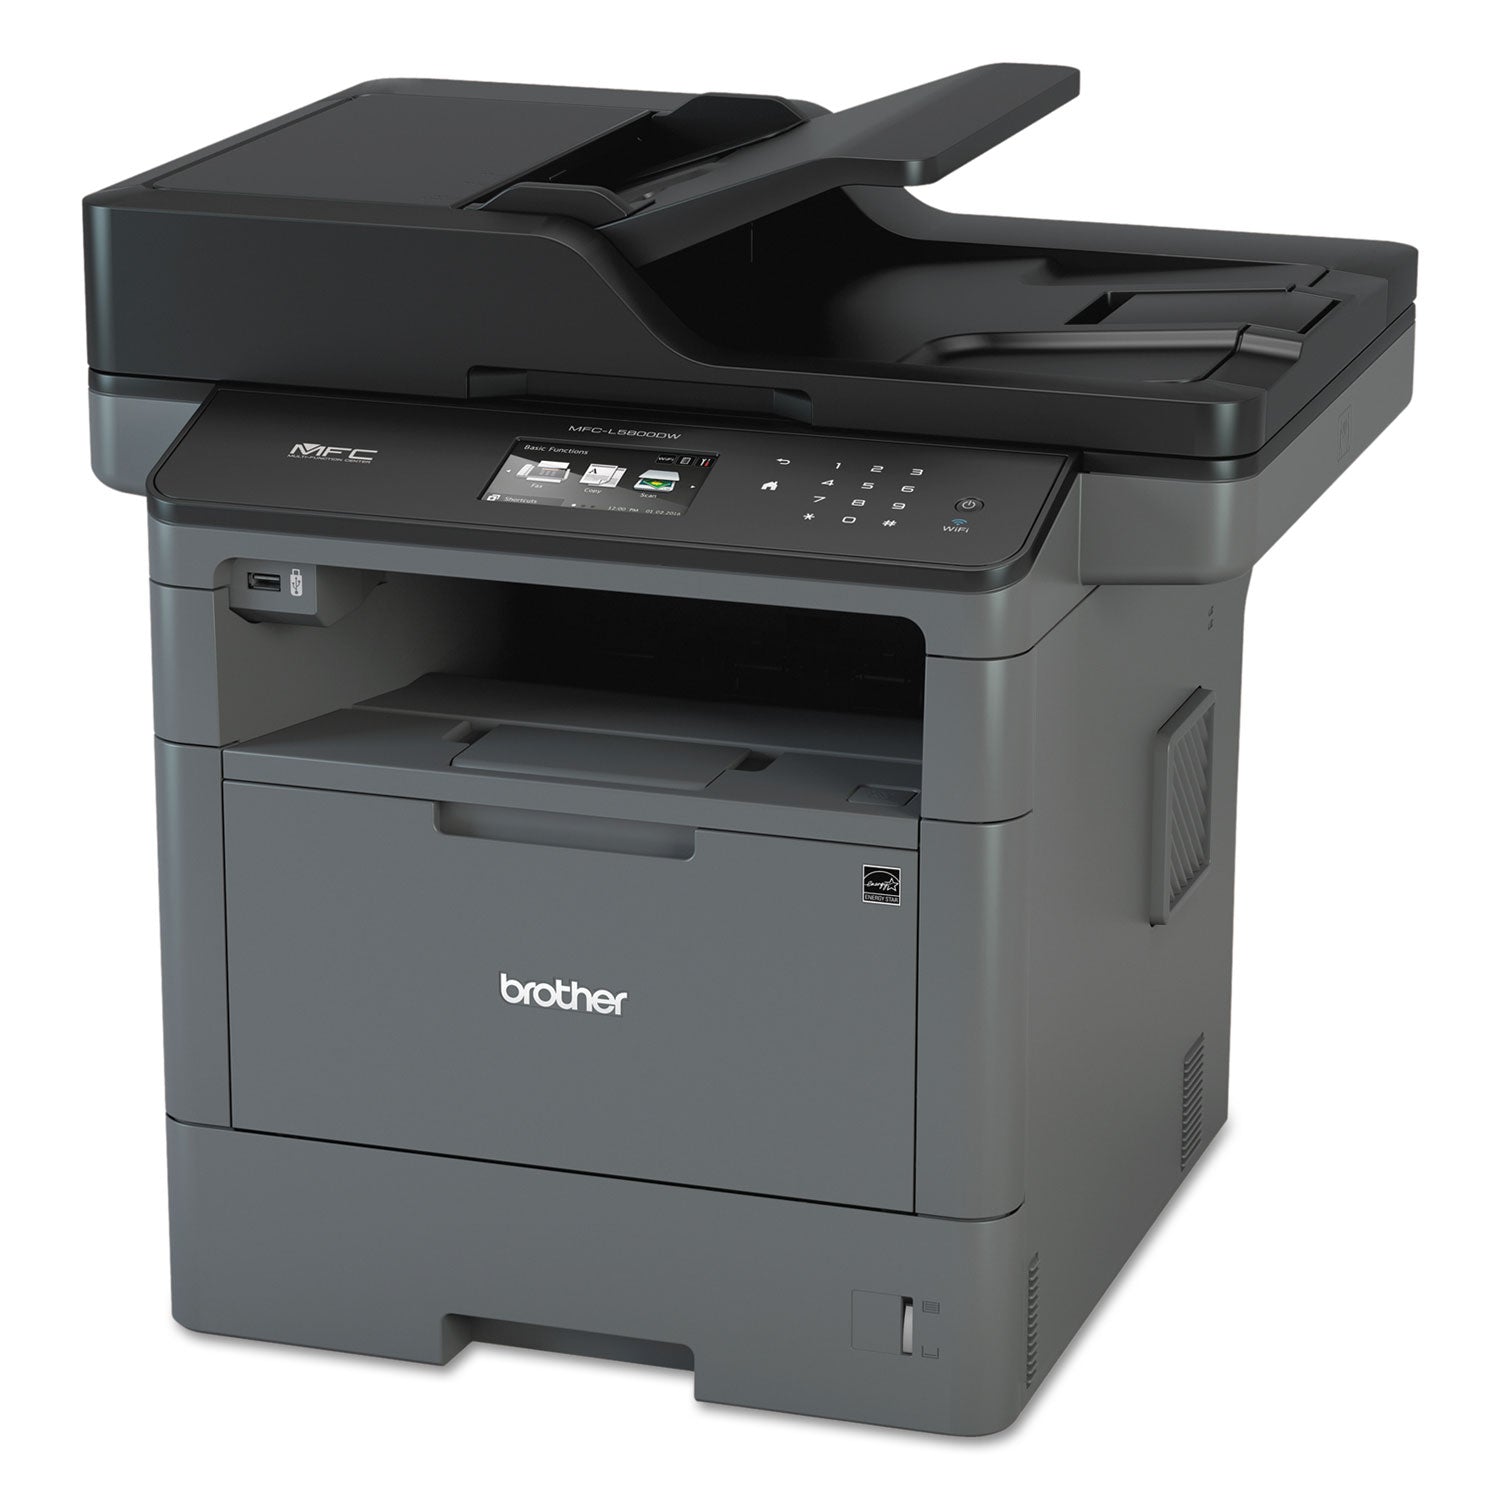 mfcl5800dw-business-laser-all-in-one-printer-with-duplex-printing-and-wireless-networking_brtmfcl5800dw - 2